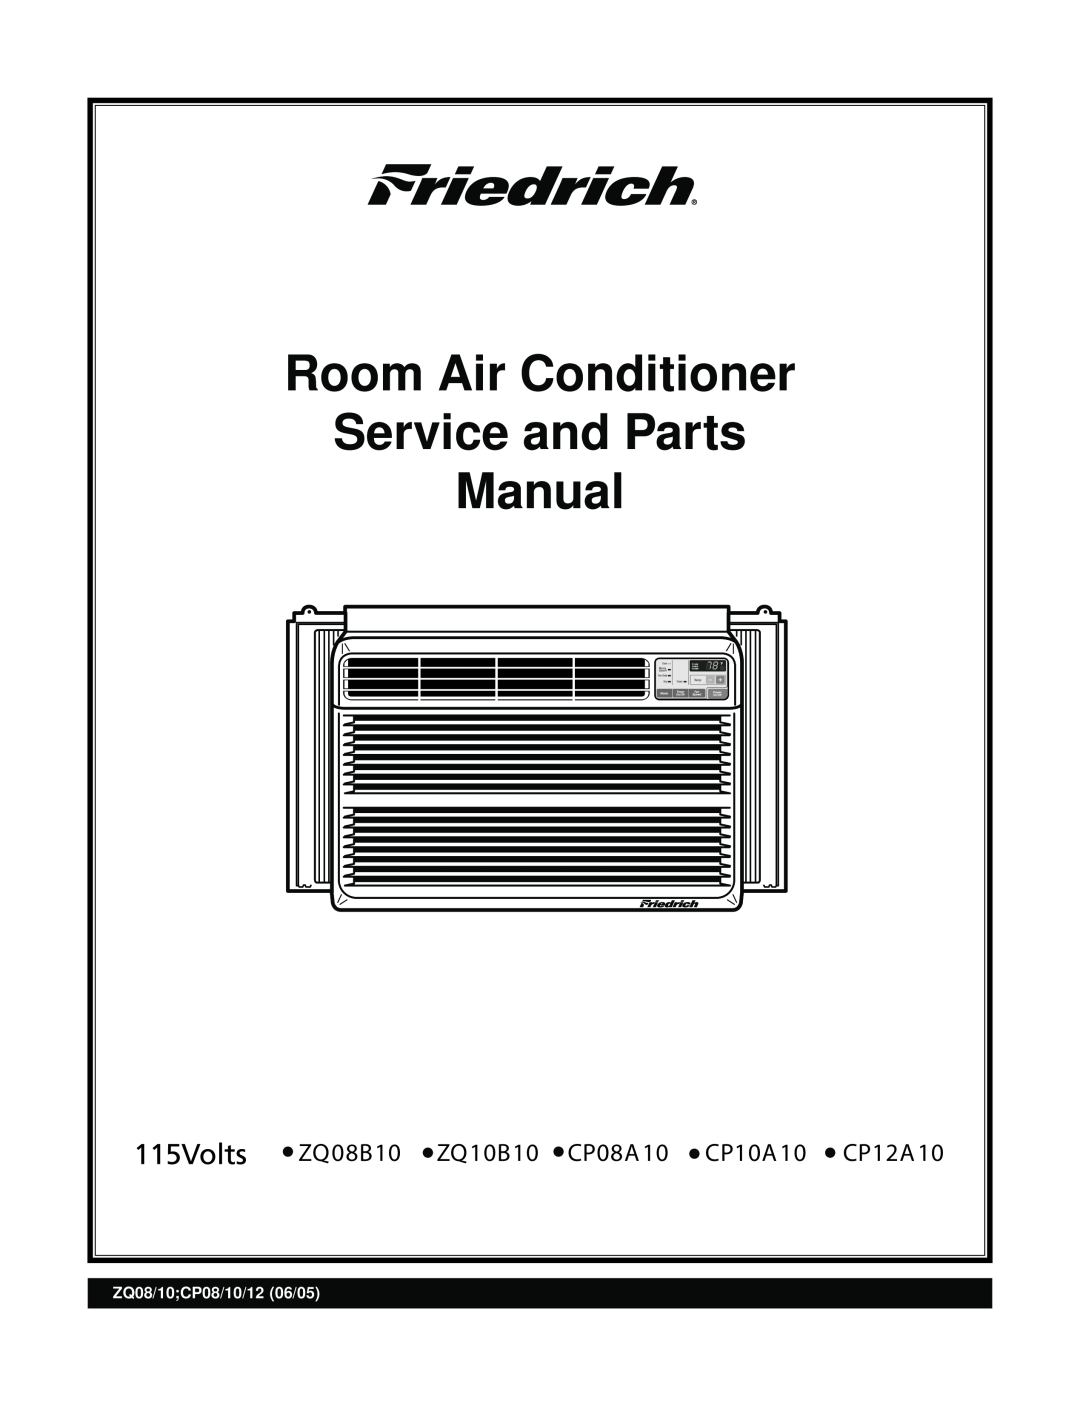 Friedrich manual ZQ08B10 ZQ10B10 CP08A10 CP10A10 CP12A10, Room Air Conditioner Service and Parts Manual 